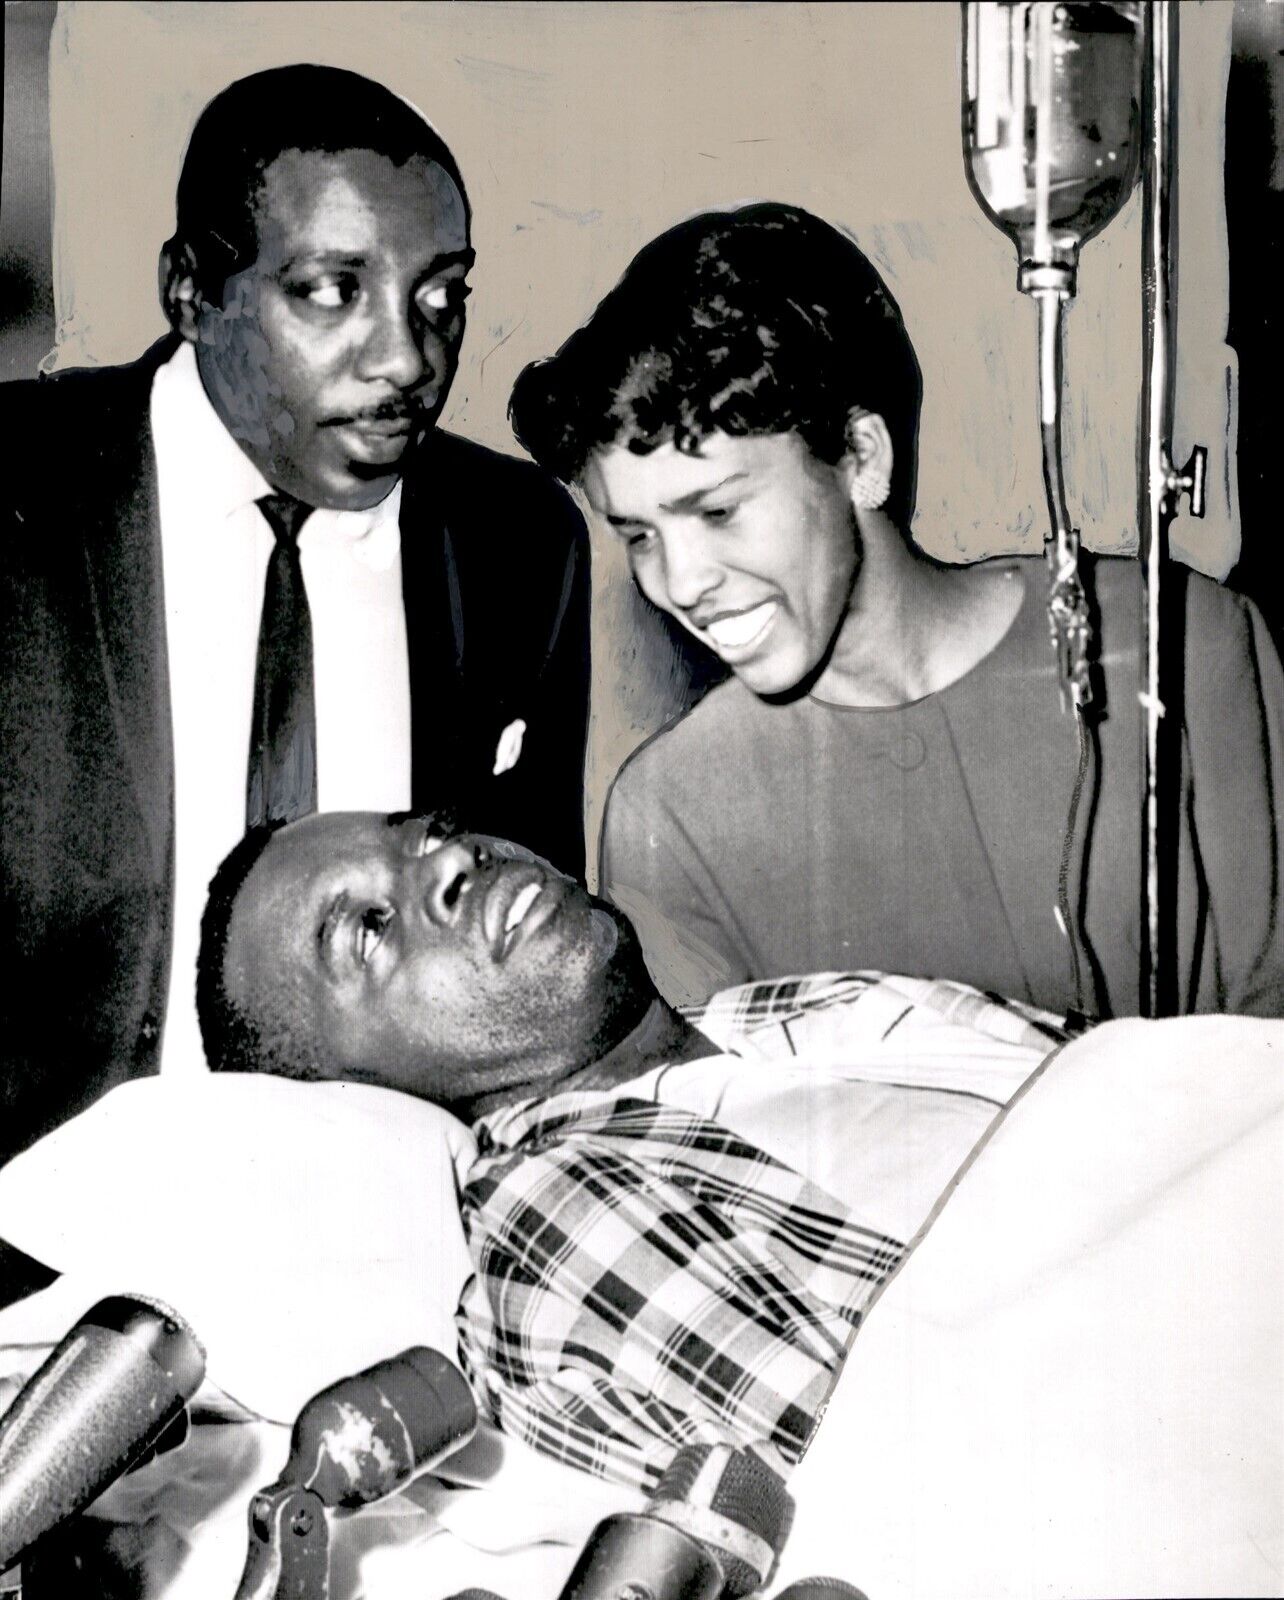 LG77 1966 Wire Photo DICK GREGORY VISITS WOUNDED DEM WILLIAM DAWSON CIVIL RIGHTS